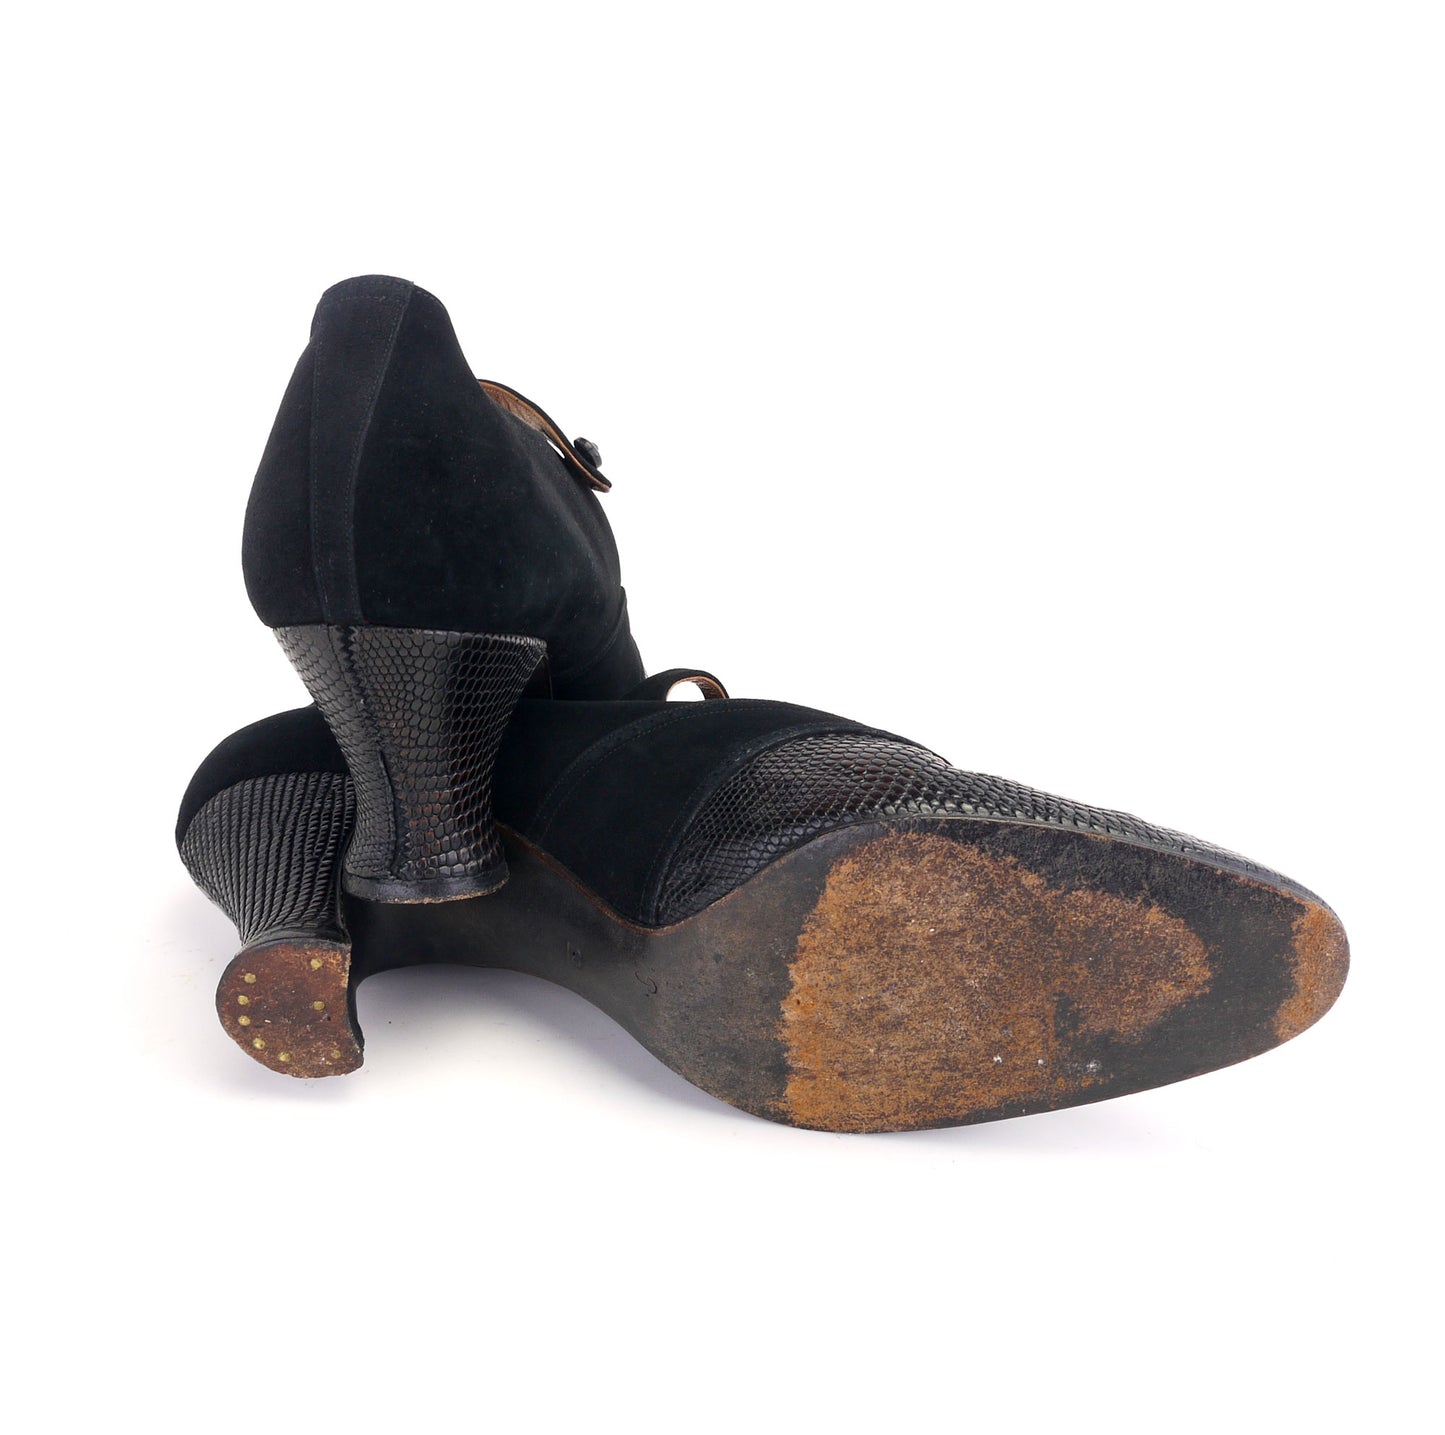 1920s Black Suede & Leather Bar Shoes UK 4